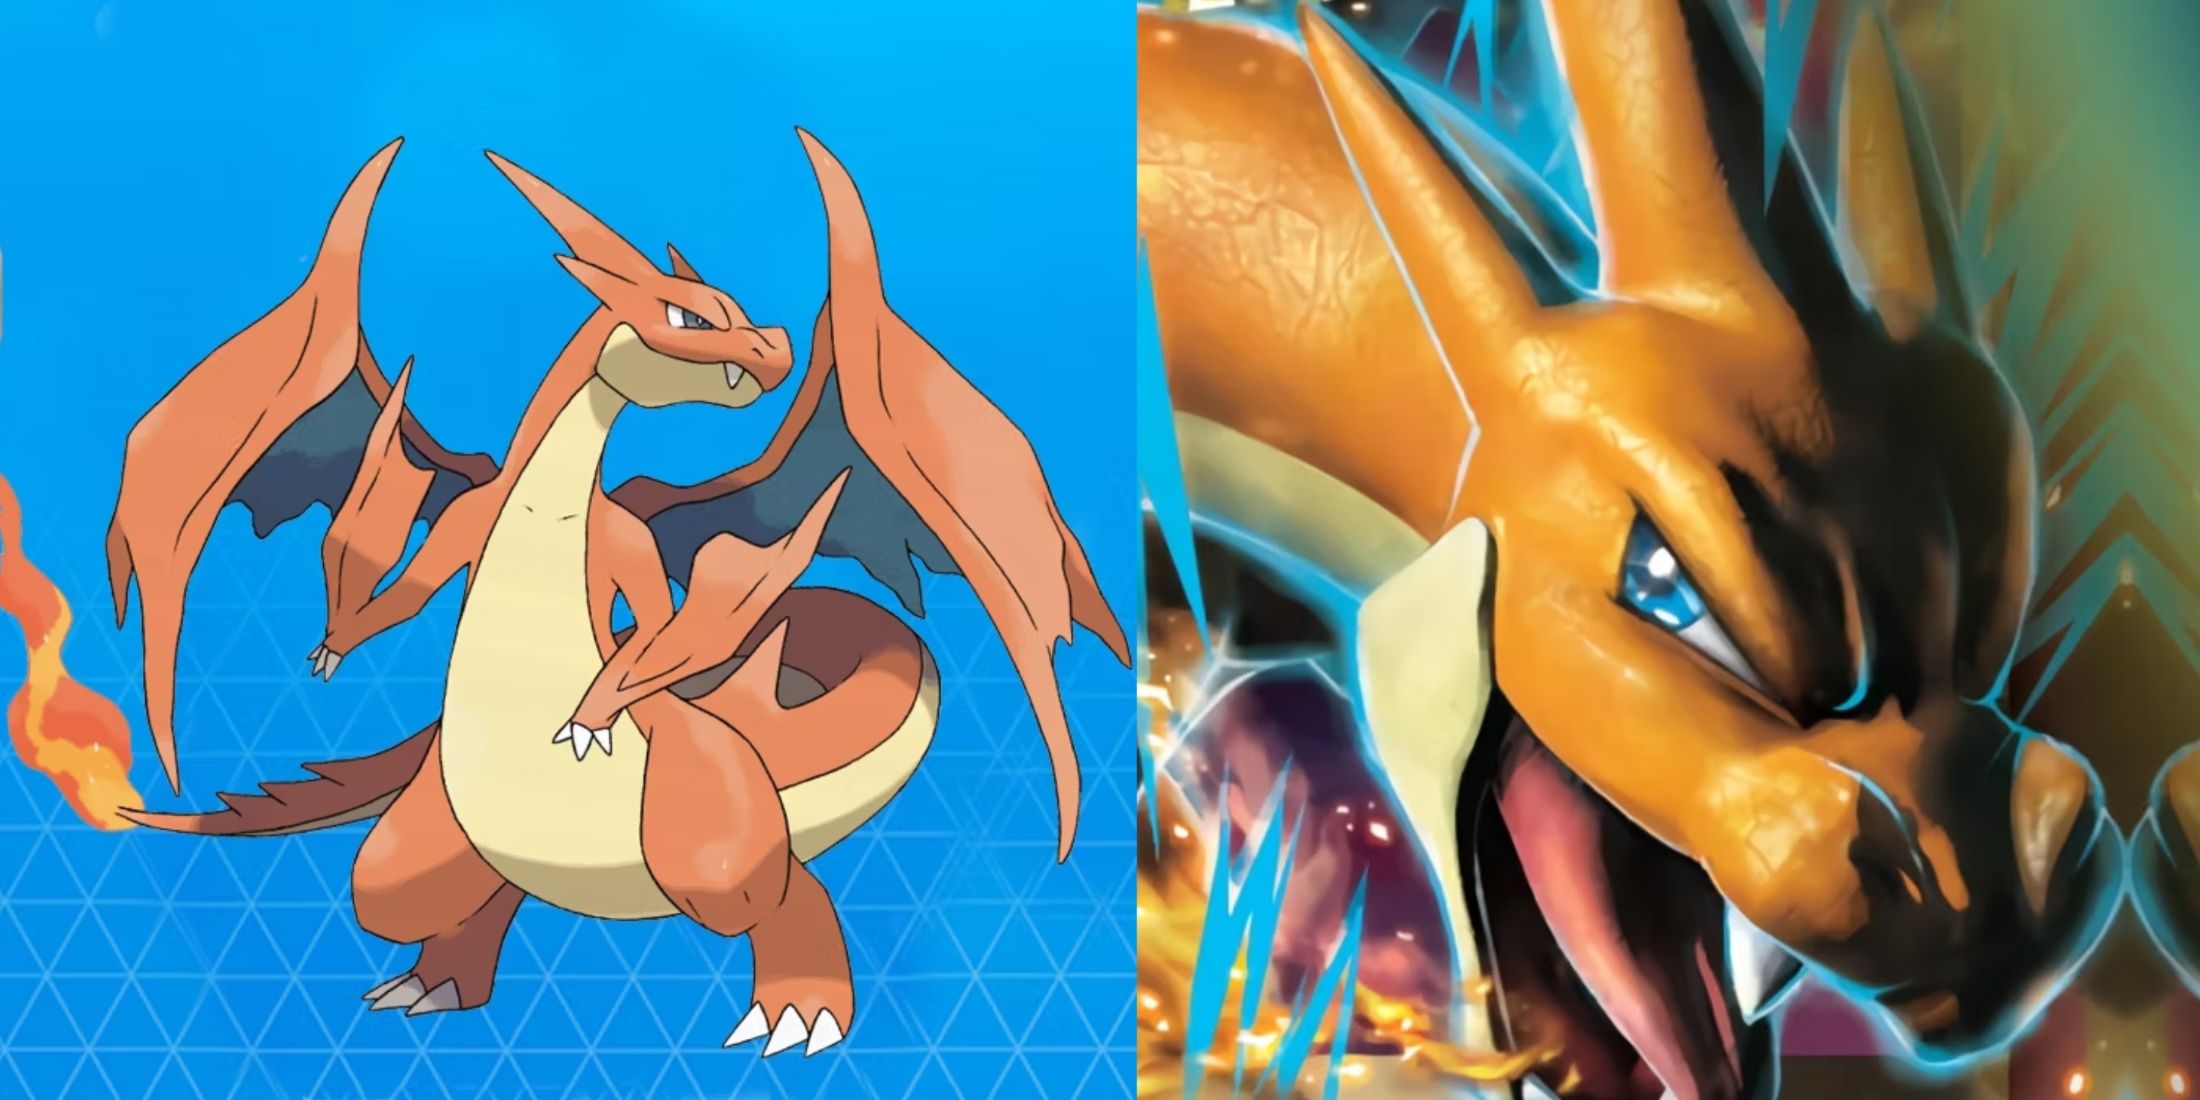 Charizard Y from Pokemon Go next to his design from the Trading Card Game